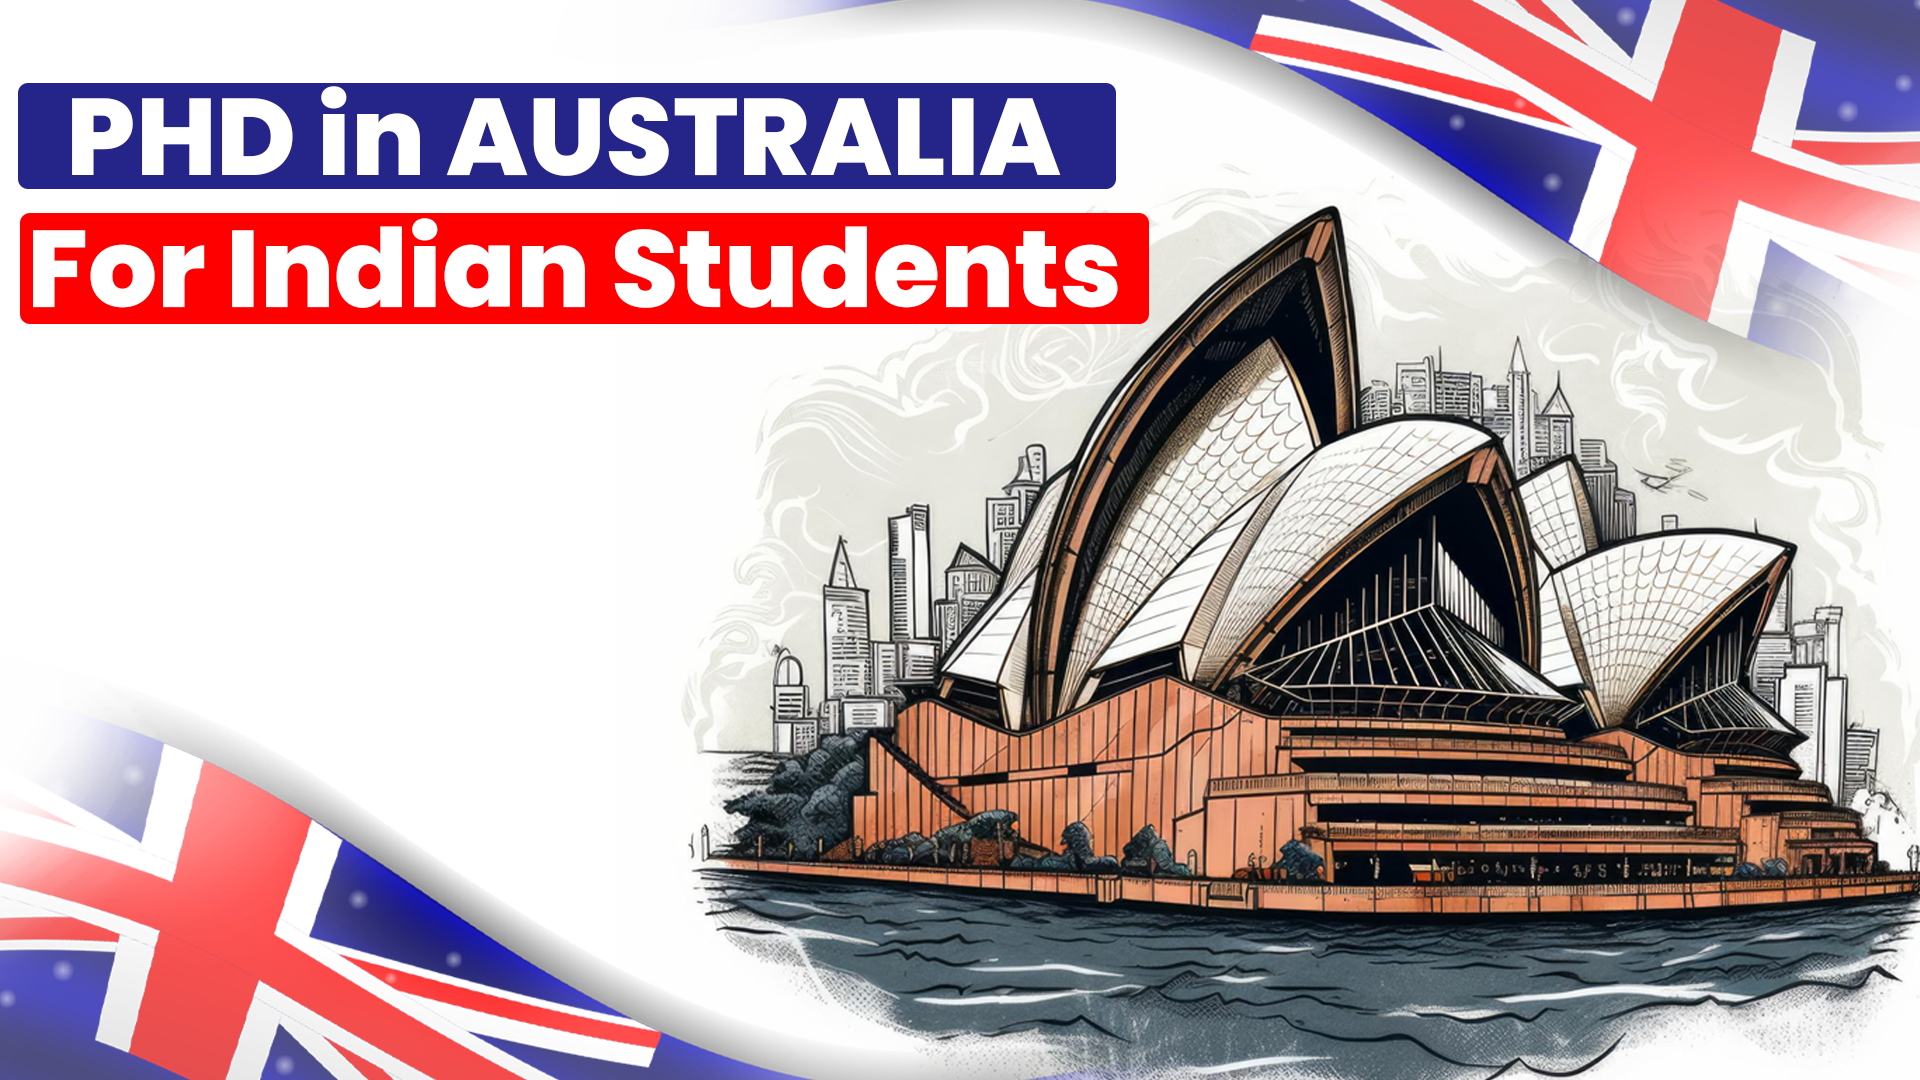 PHD in Australia For Indian Students - Your Pedia Global